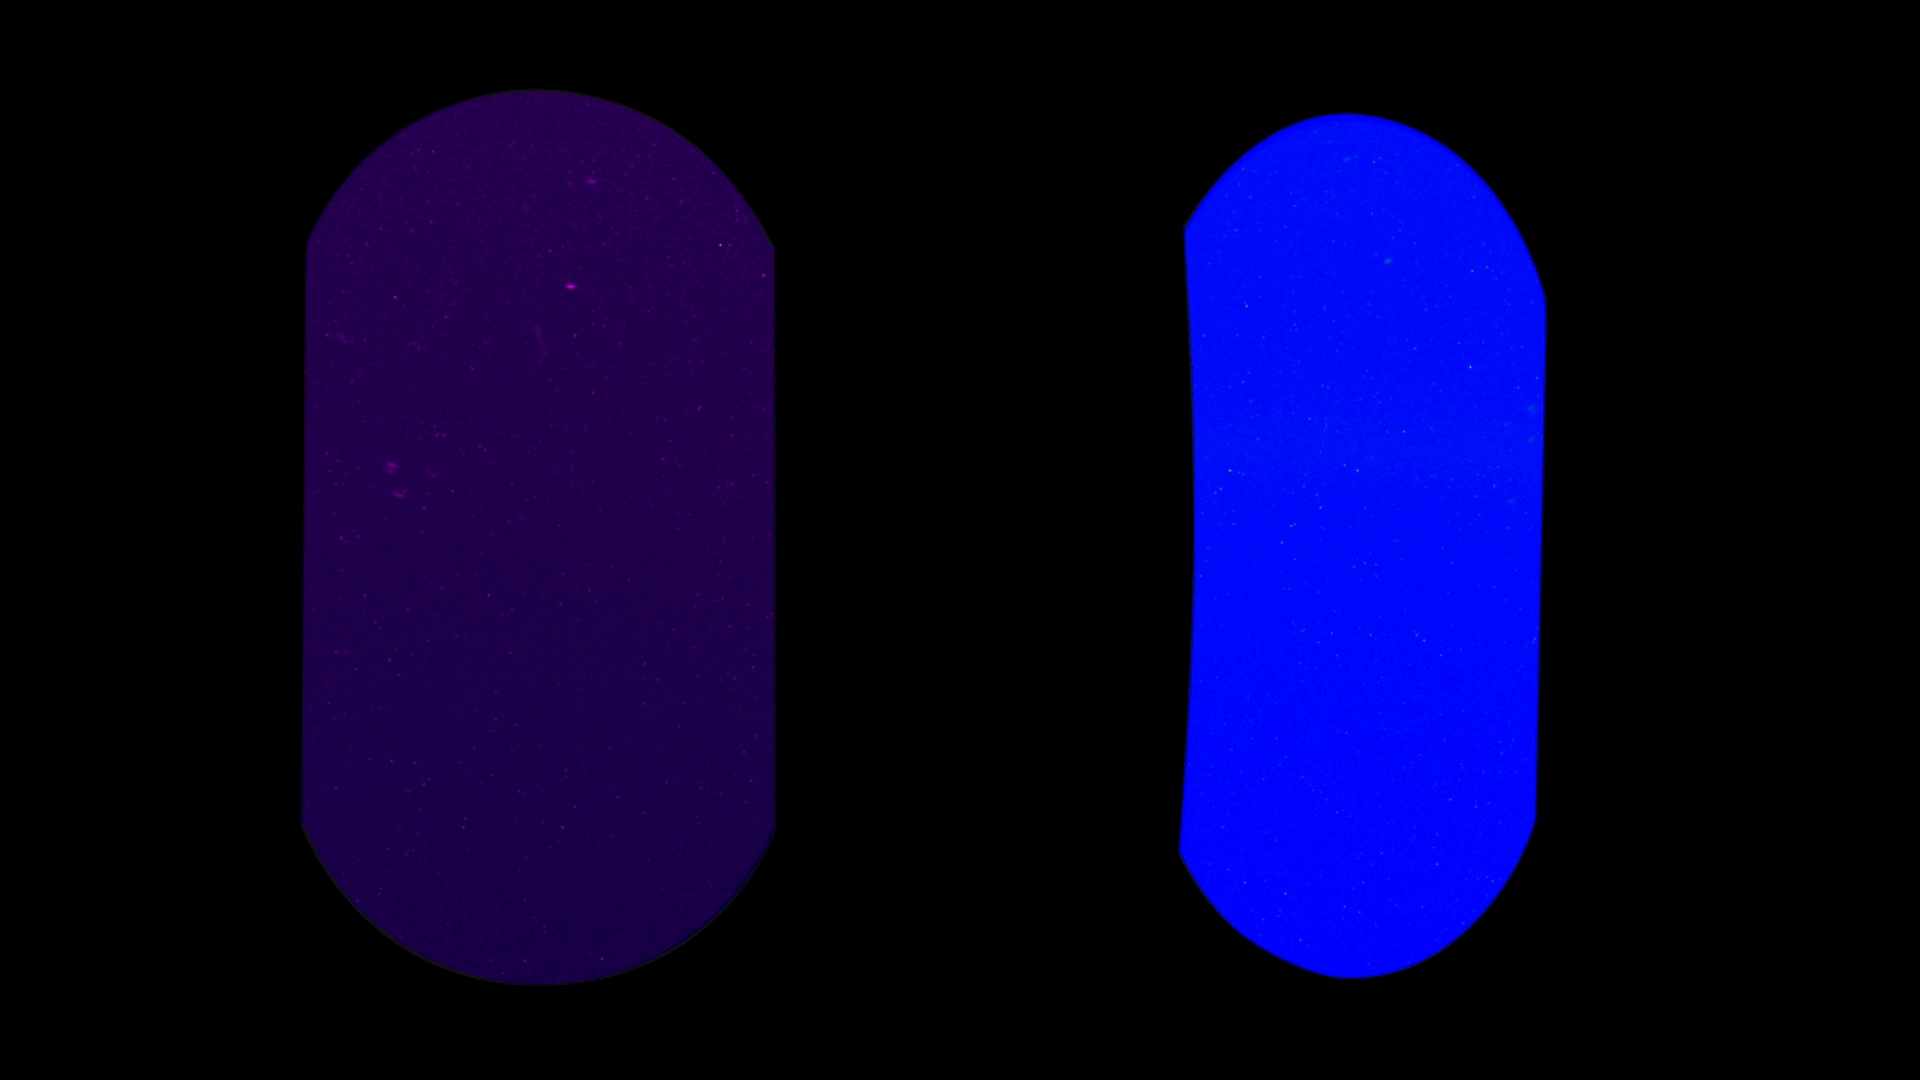 Two vertical, oval-shaped panels appear side by side. In the left panel a bright pink arc appears across the center and a fainter pink glow fades in below it. In the right panel, a bright green arc appears across the center and a fainter green glow fades in below it.